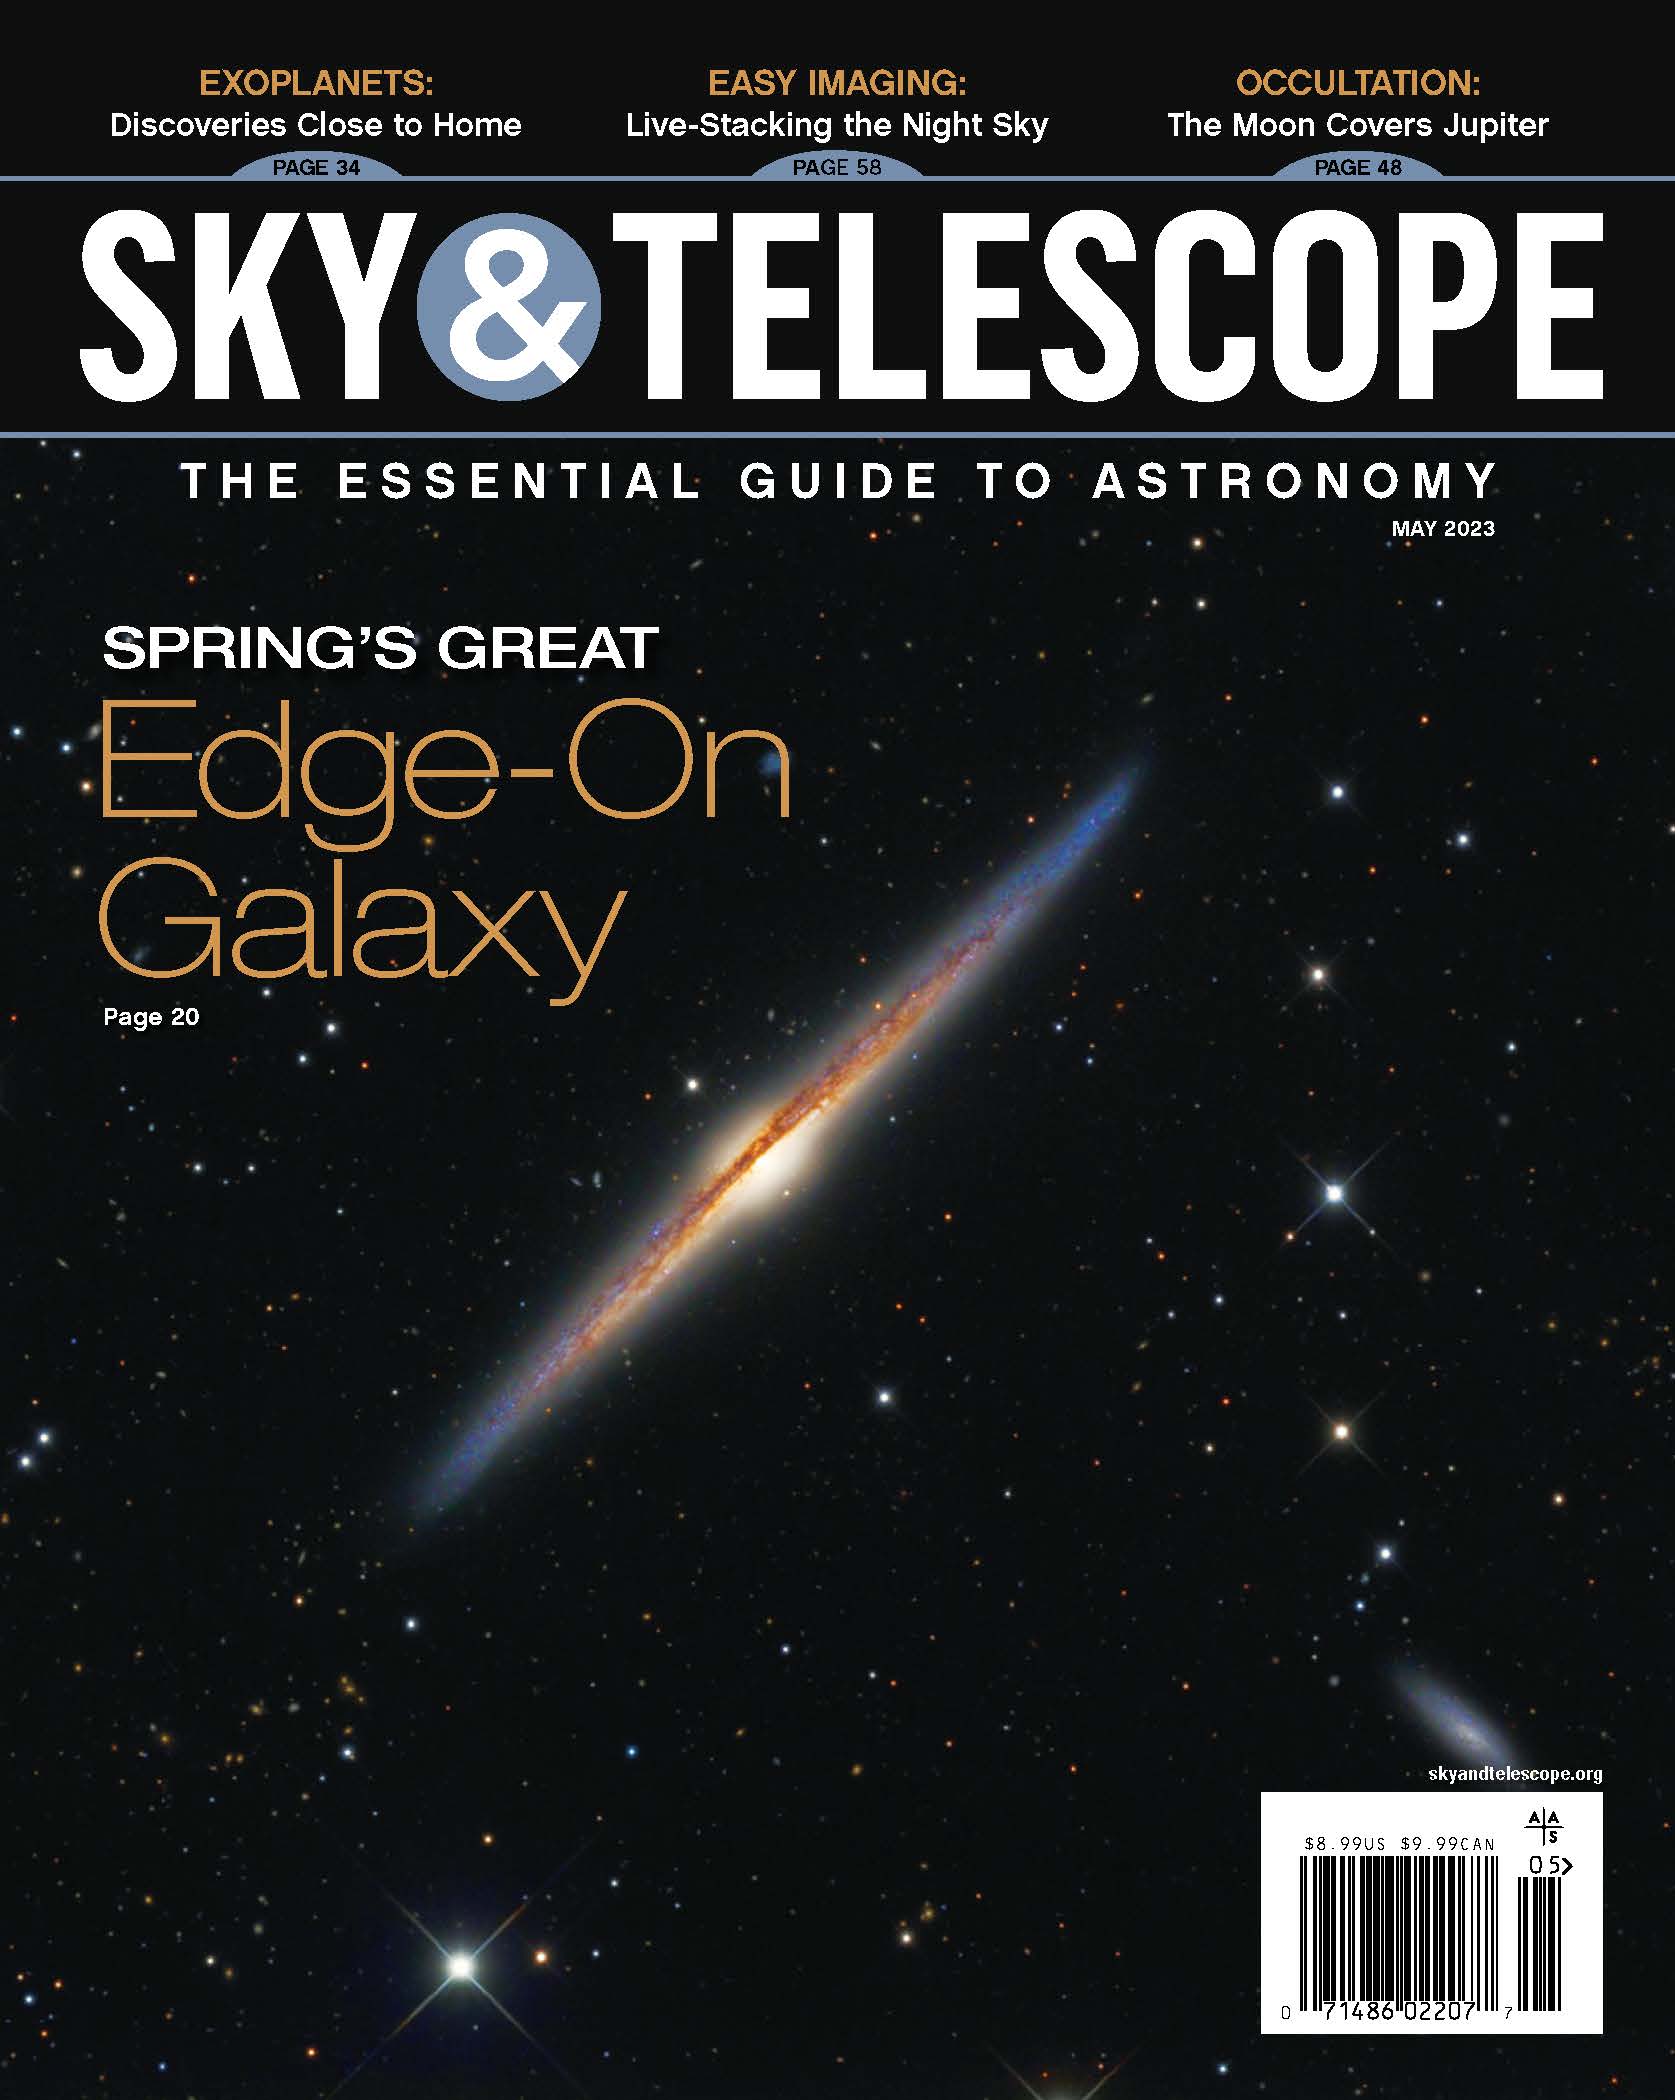 The cover of the May 2023 Issue